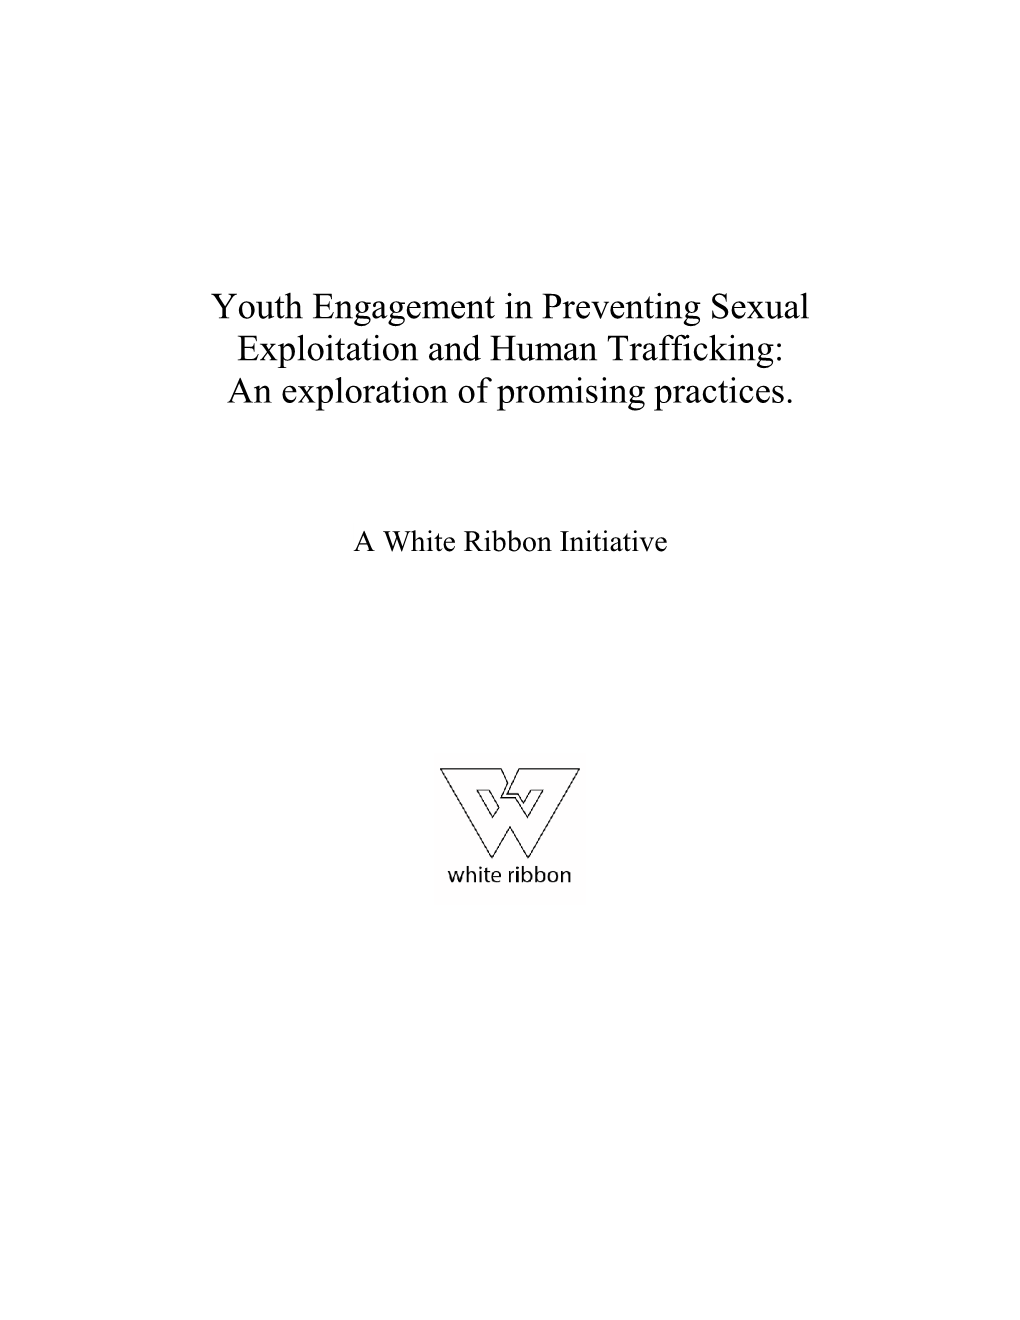 Youth Engagement in Preventing Sexual Exploitation and Human Trafficking: an Exploration of Promising Practices